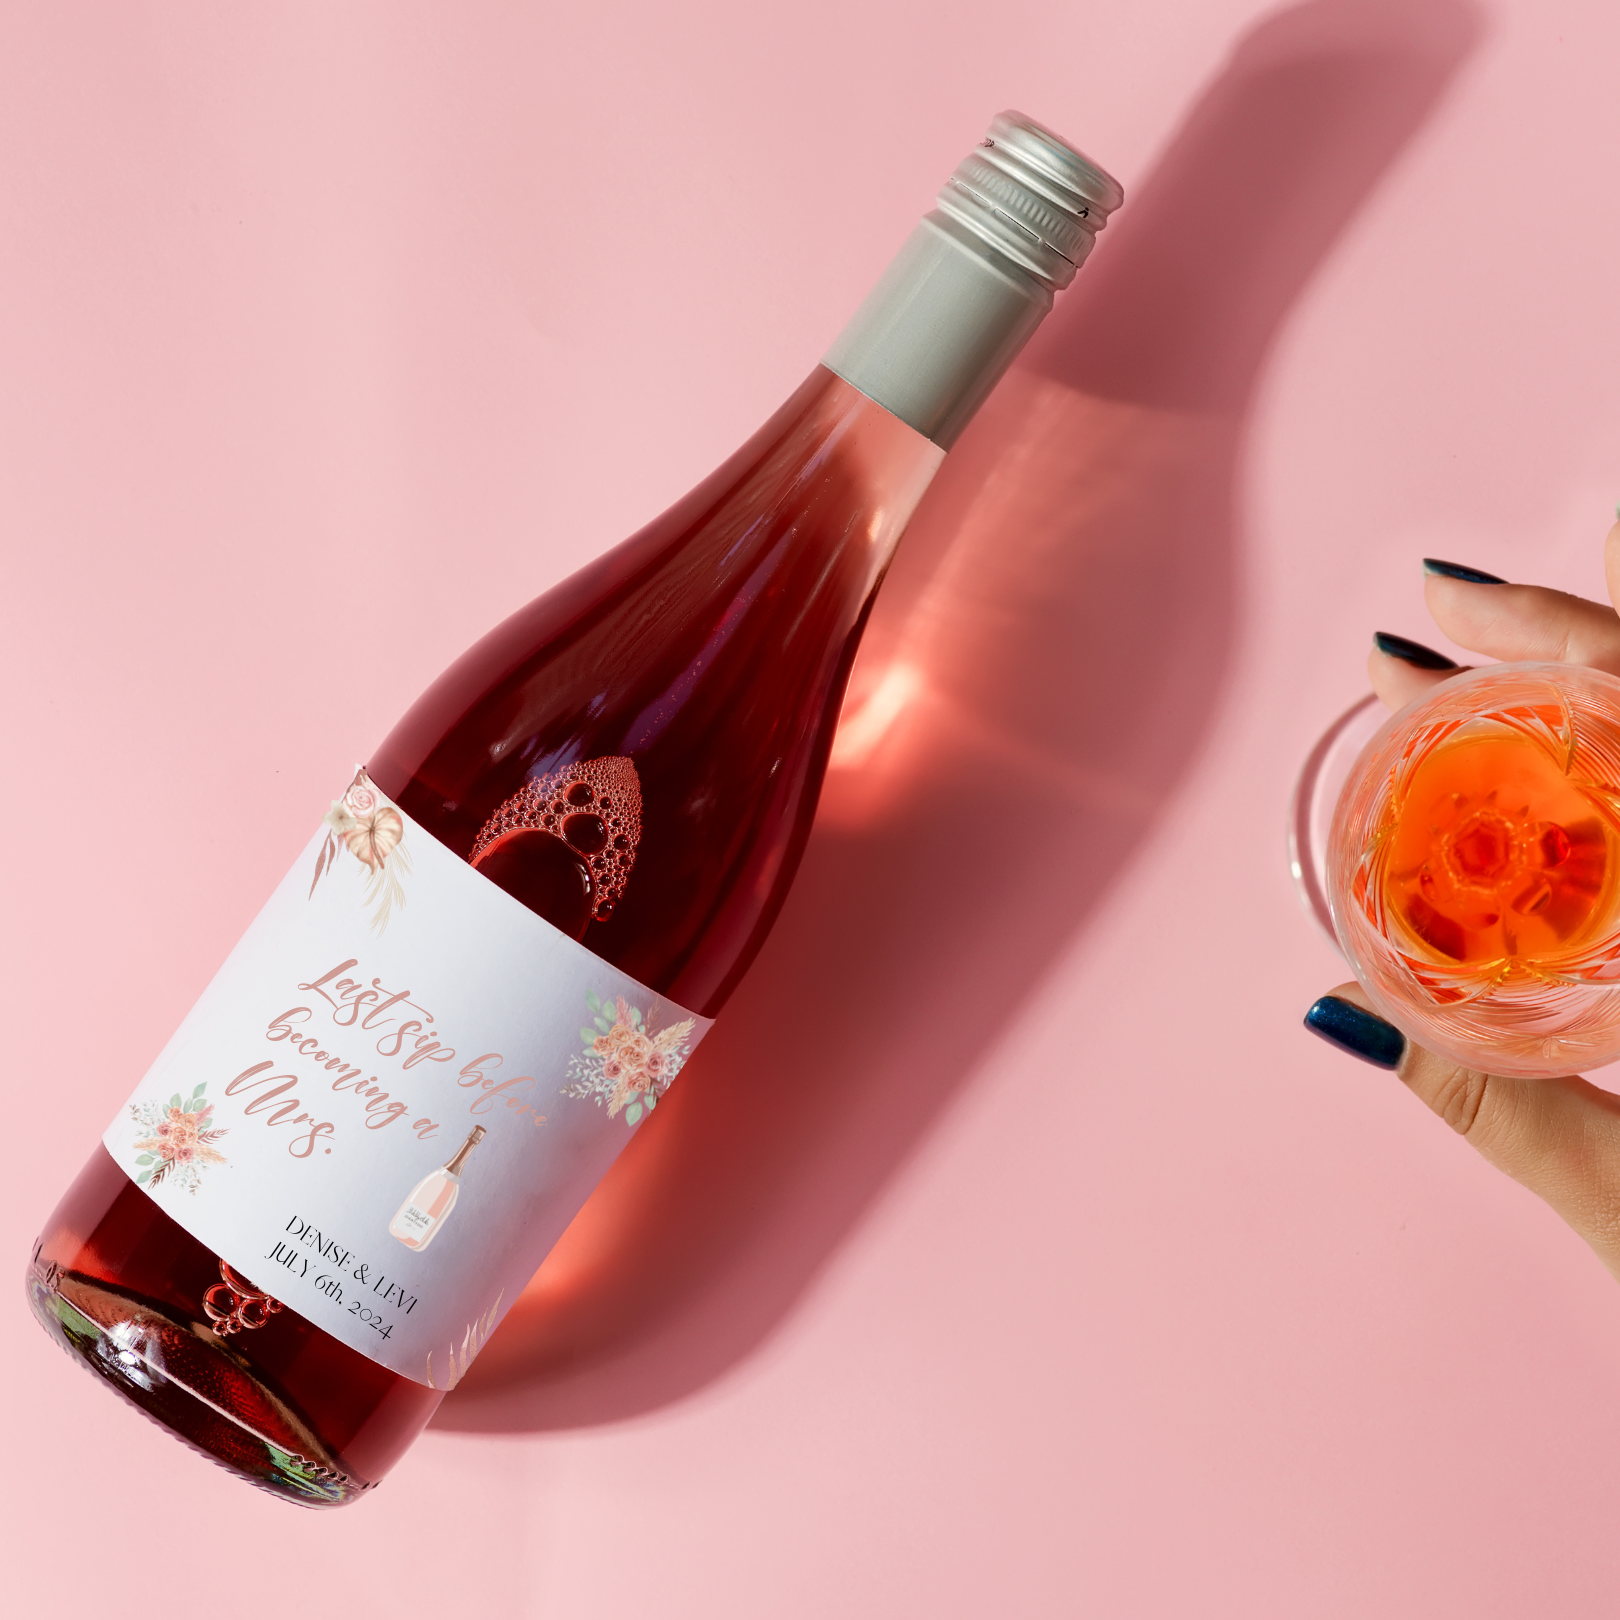 A bottle of rosé lays against a pin background. A hand appears from the lower right side of the image holding a glass of the rosé. A custom wine label with the words "Last sip before becoming a Mrs." and "Denise & Levi...July 6th, 2024" can be seen on the bottle.